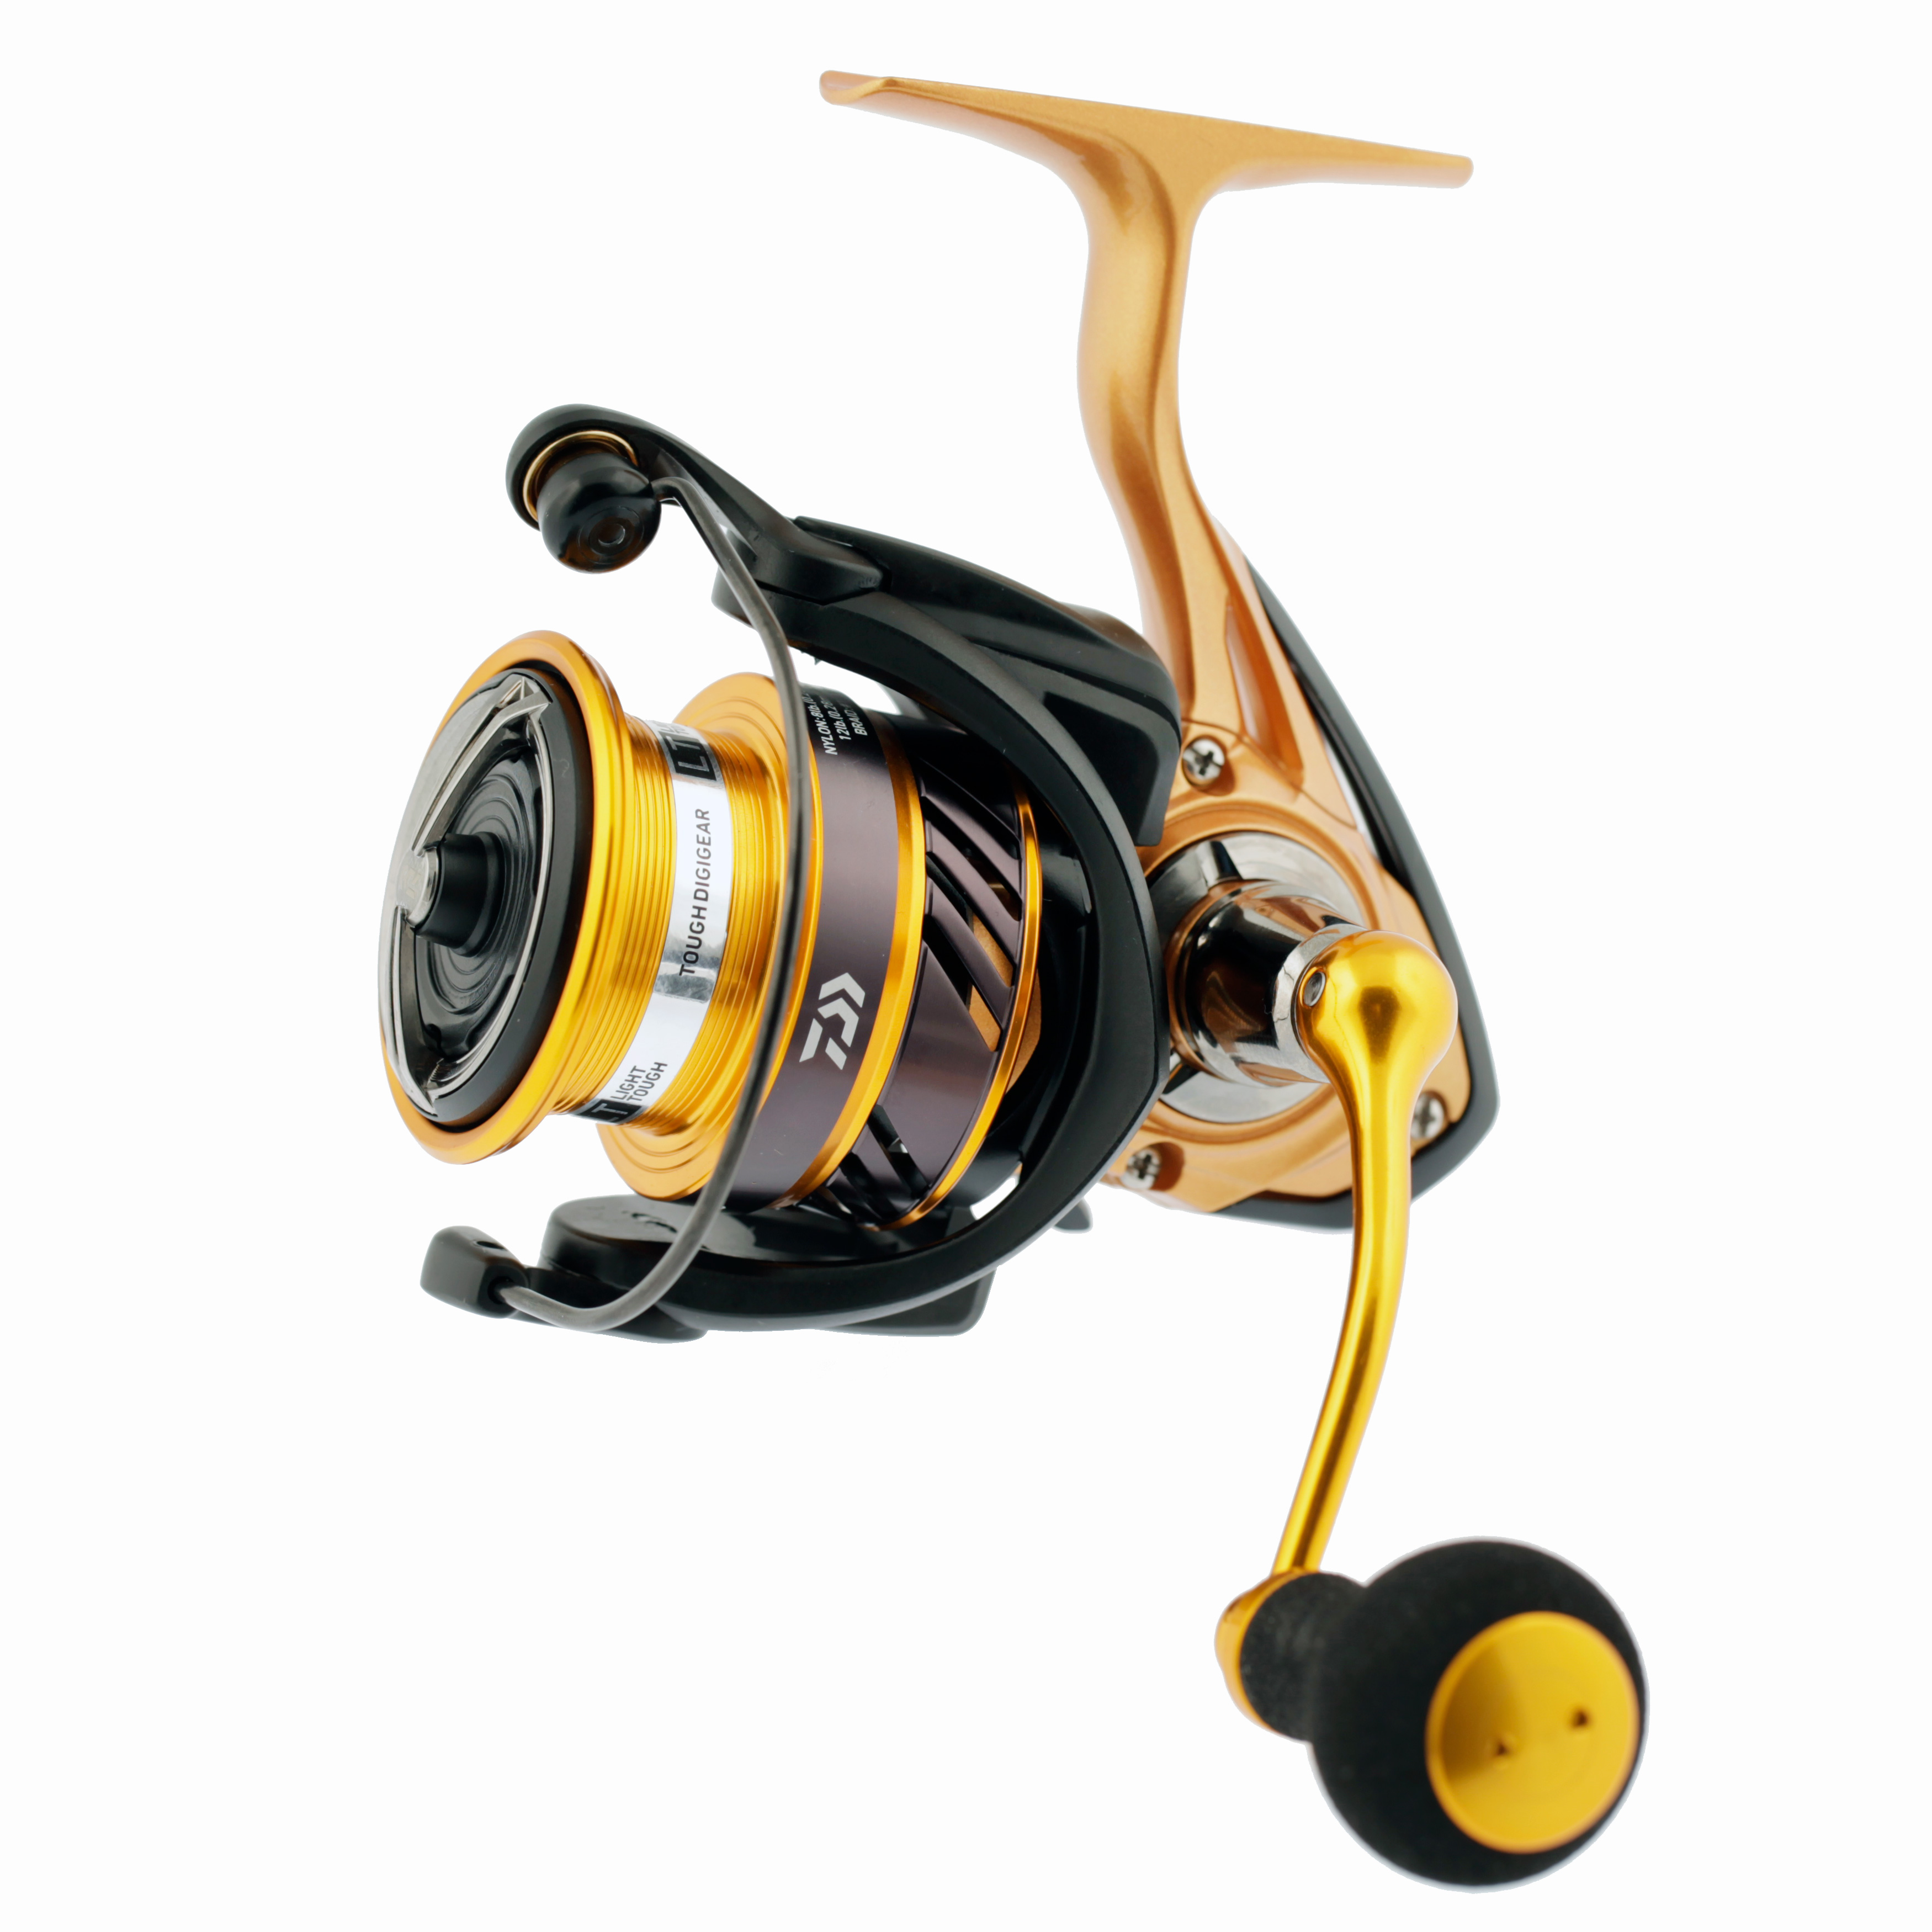 Daiwa AIRD LT 2500 Spinning Fishing Reel  NEW @ Otto's Tackle World 